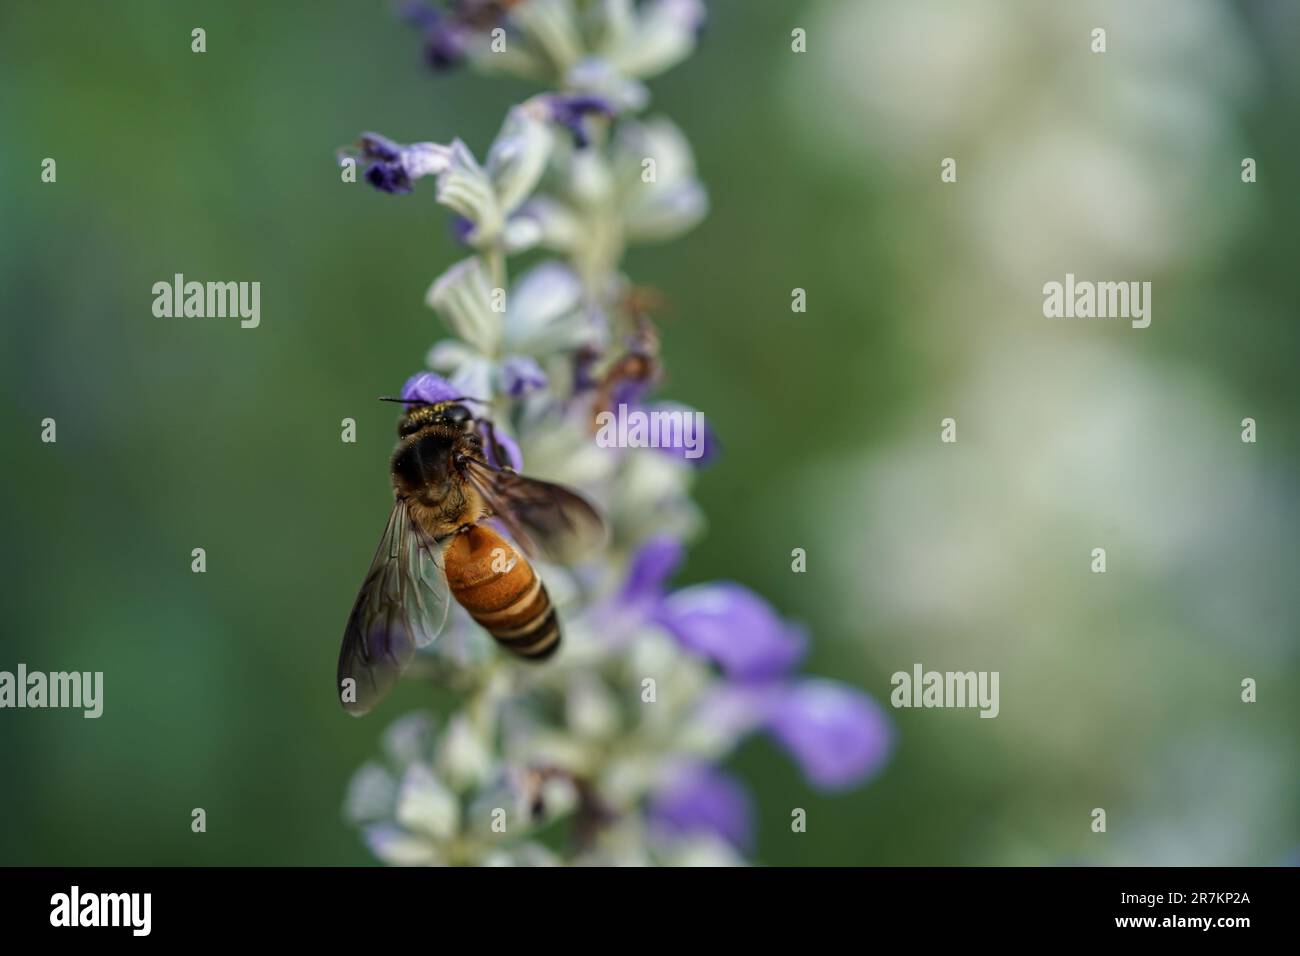 Harmony with Nature: Honey Bee and Nature's Creations Stock Photo